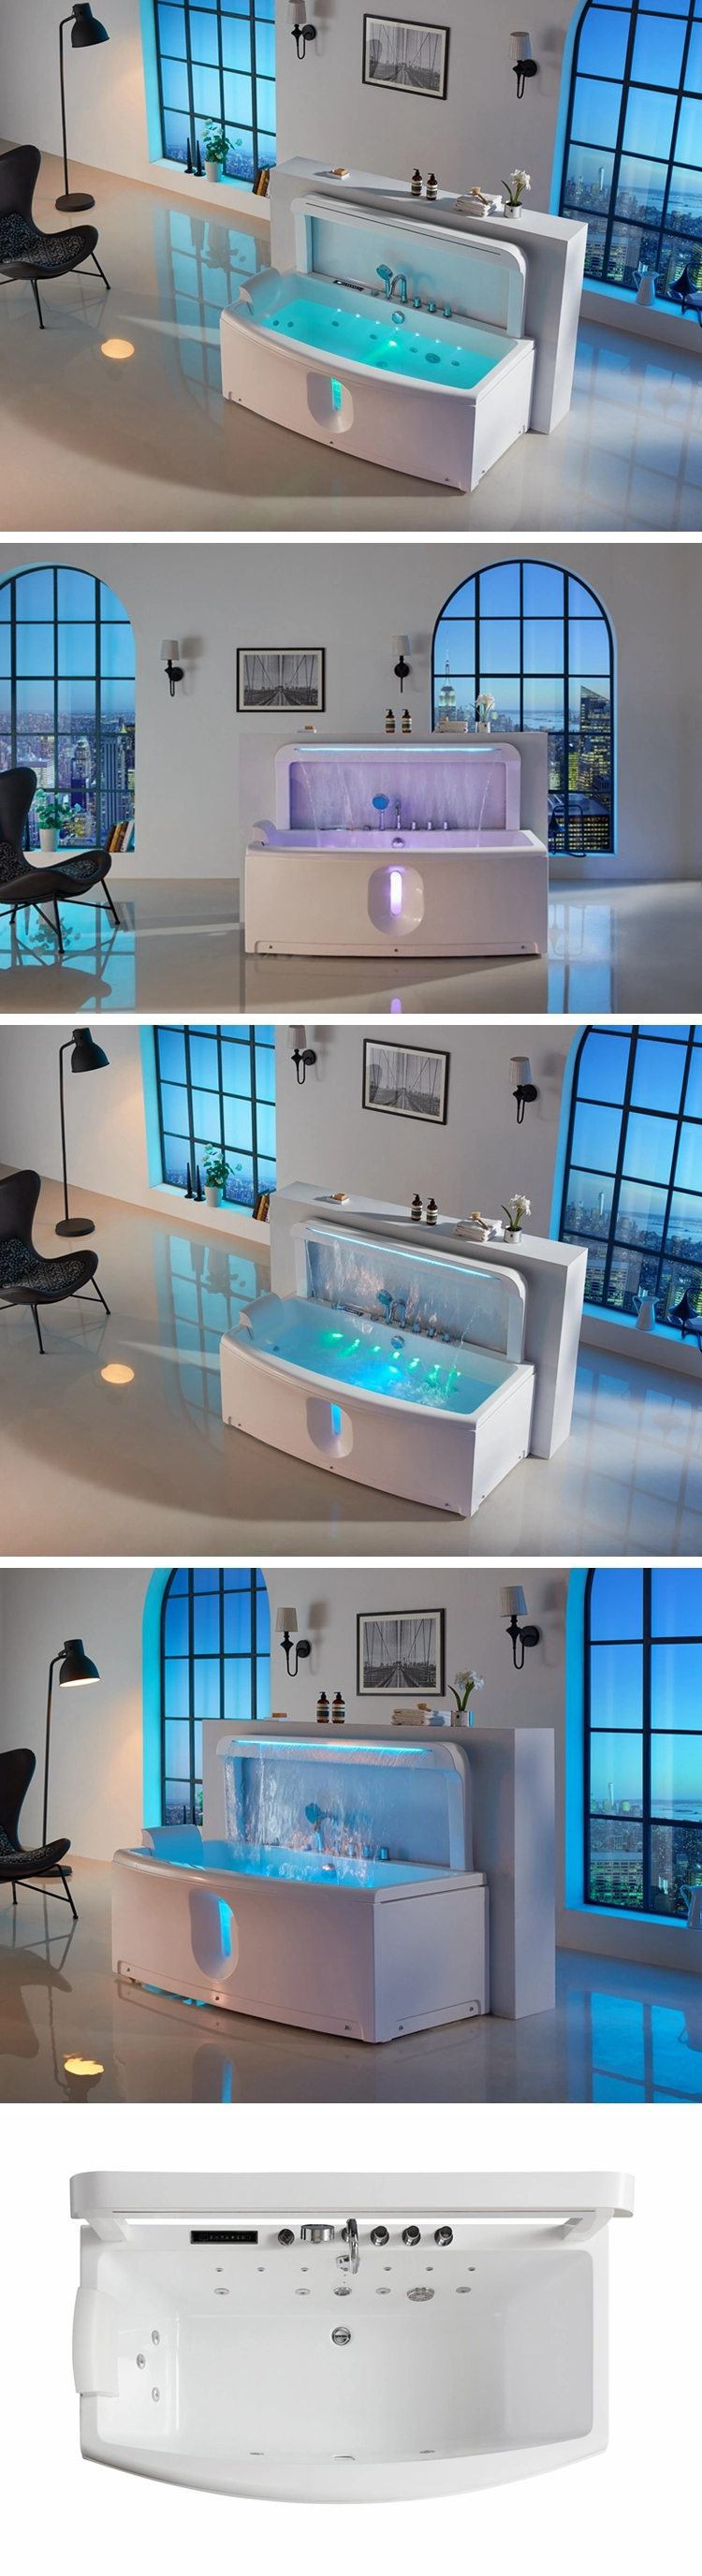 1700mm Length 8mm Thickness Acrylic Luxury Sexy Massage Bathtub for Jacuzzi